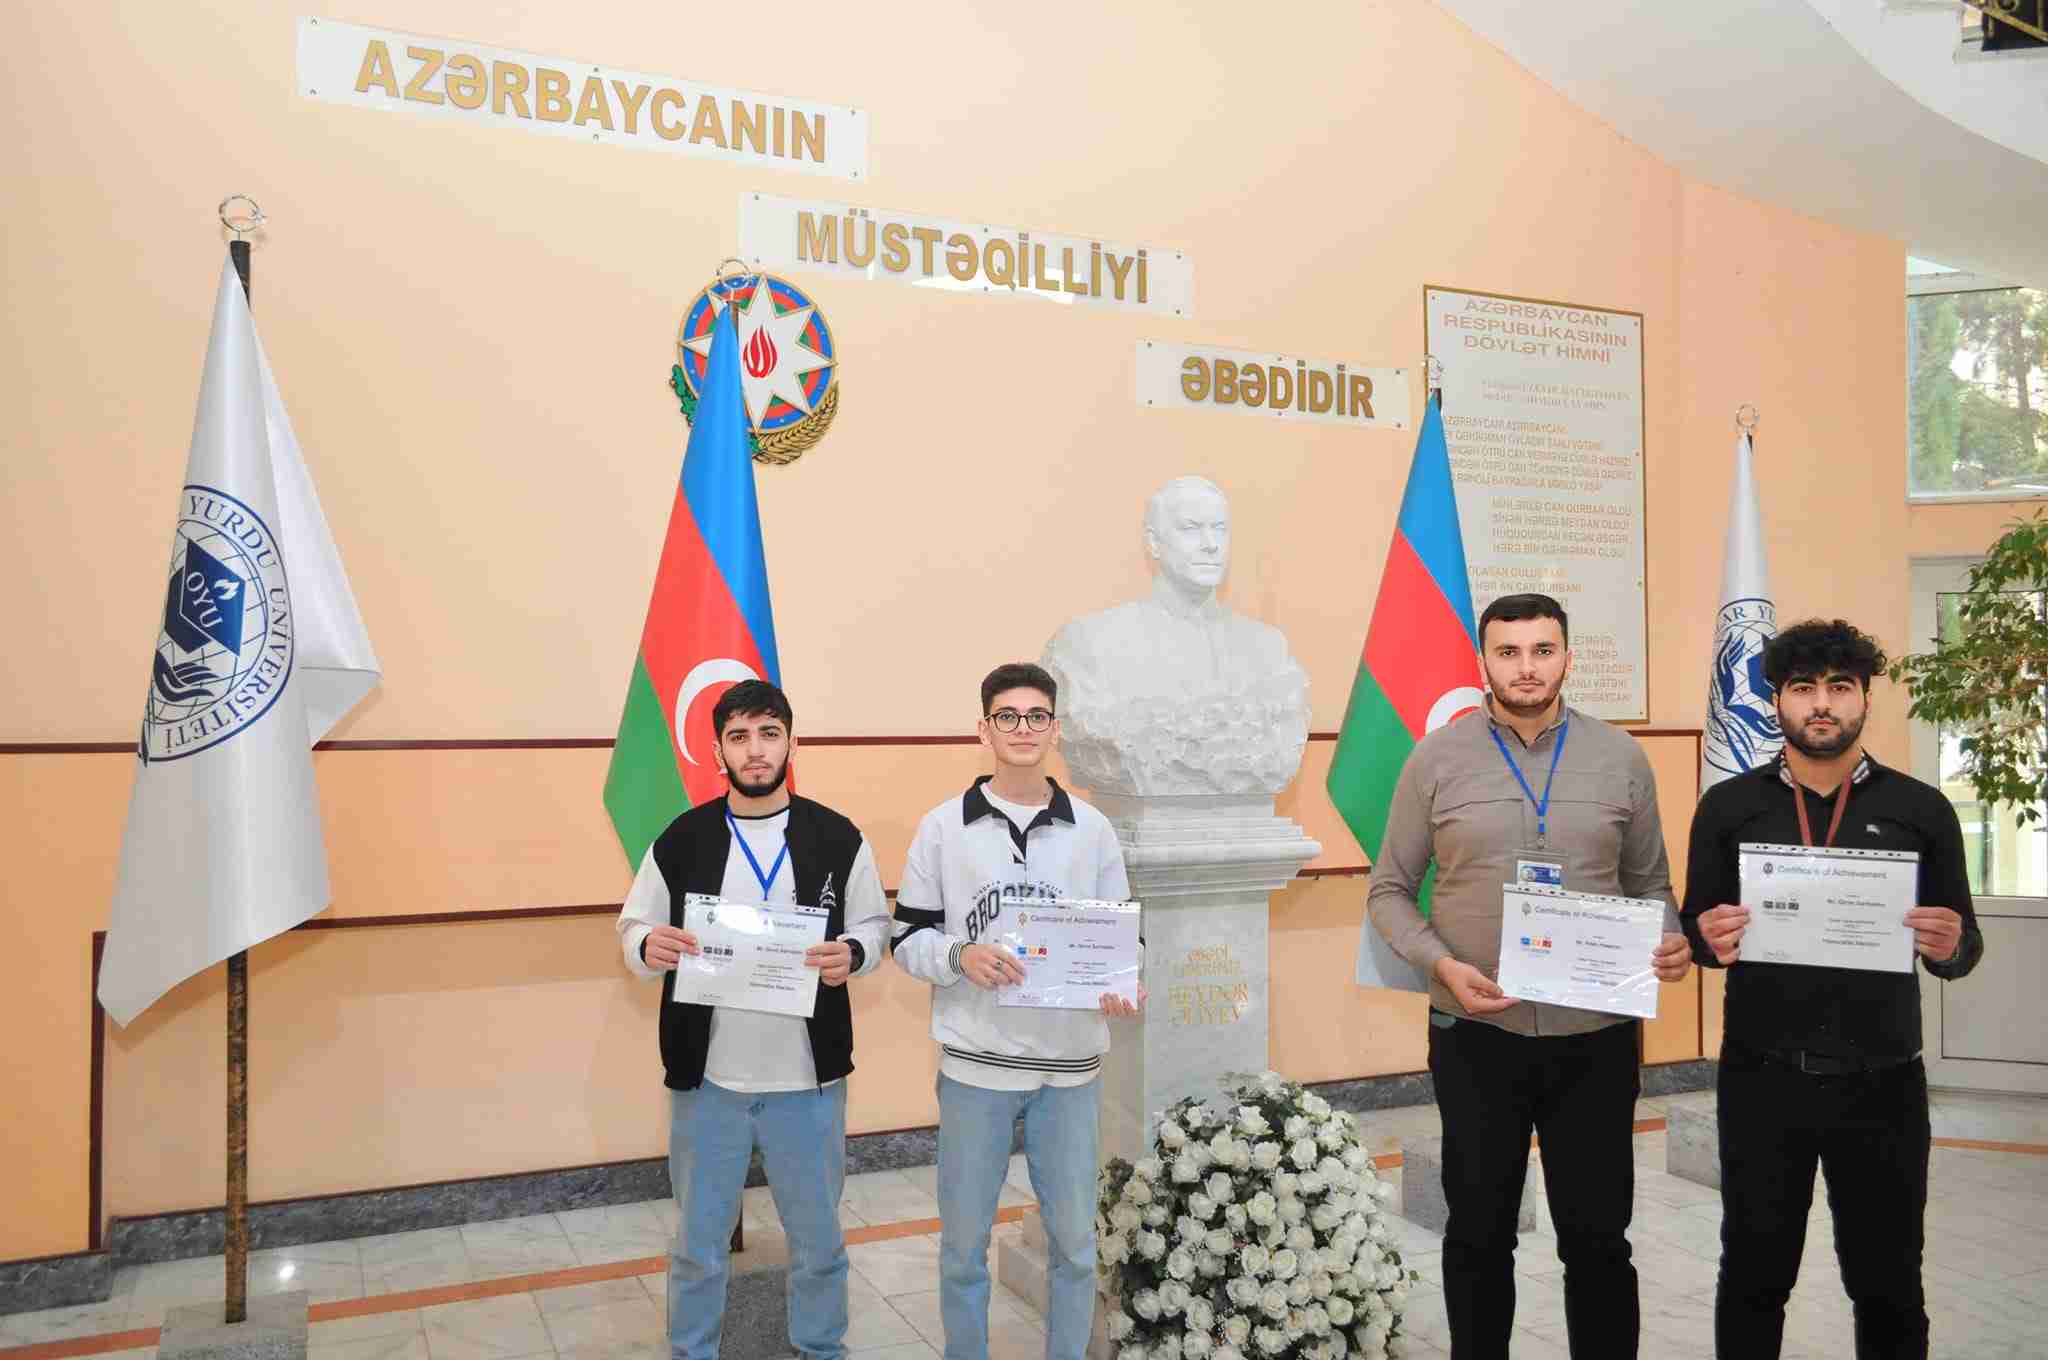 The students of OYU have qualified for the quarter-final stage of the 48th International programming competition in Azerbaijan